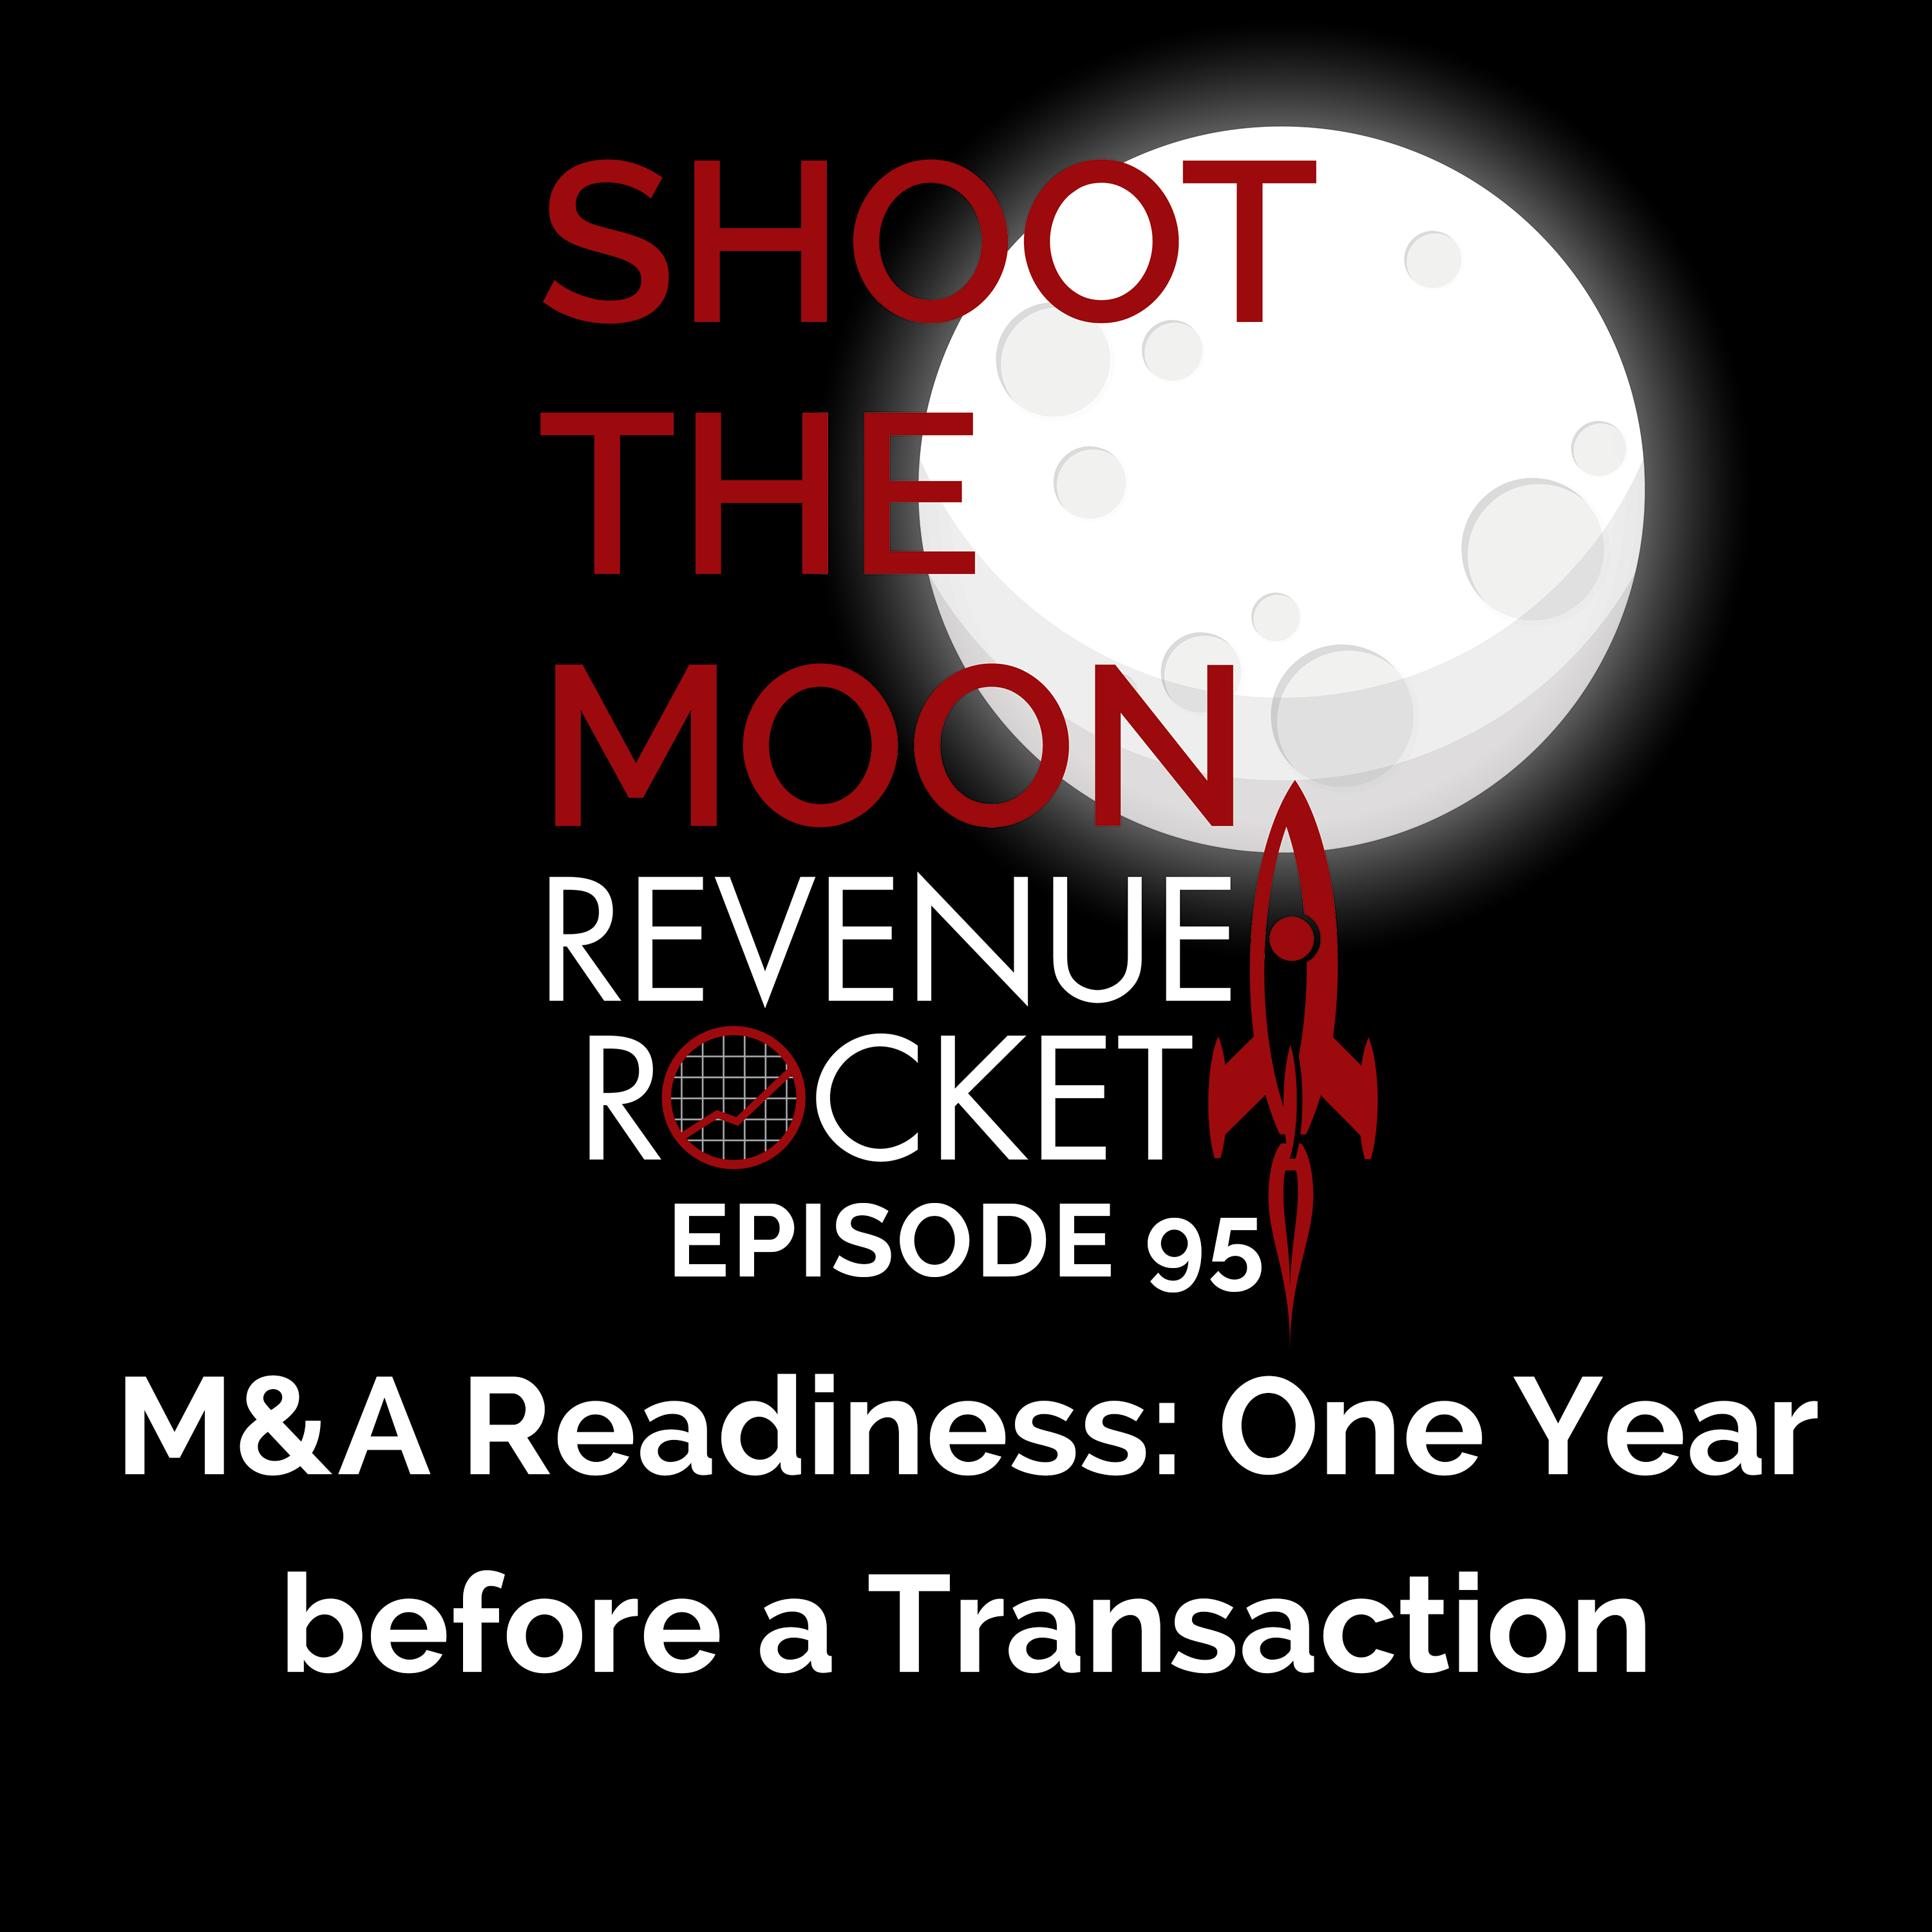 M&A Readiness podcast episode